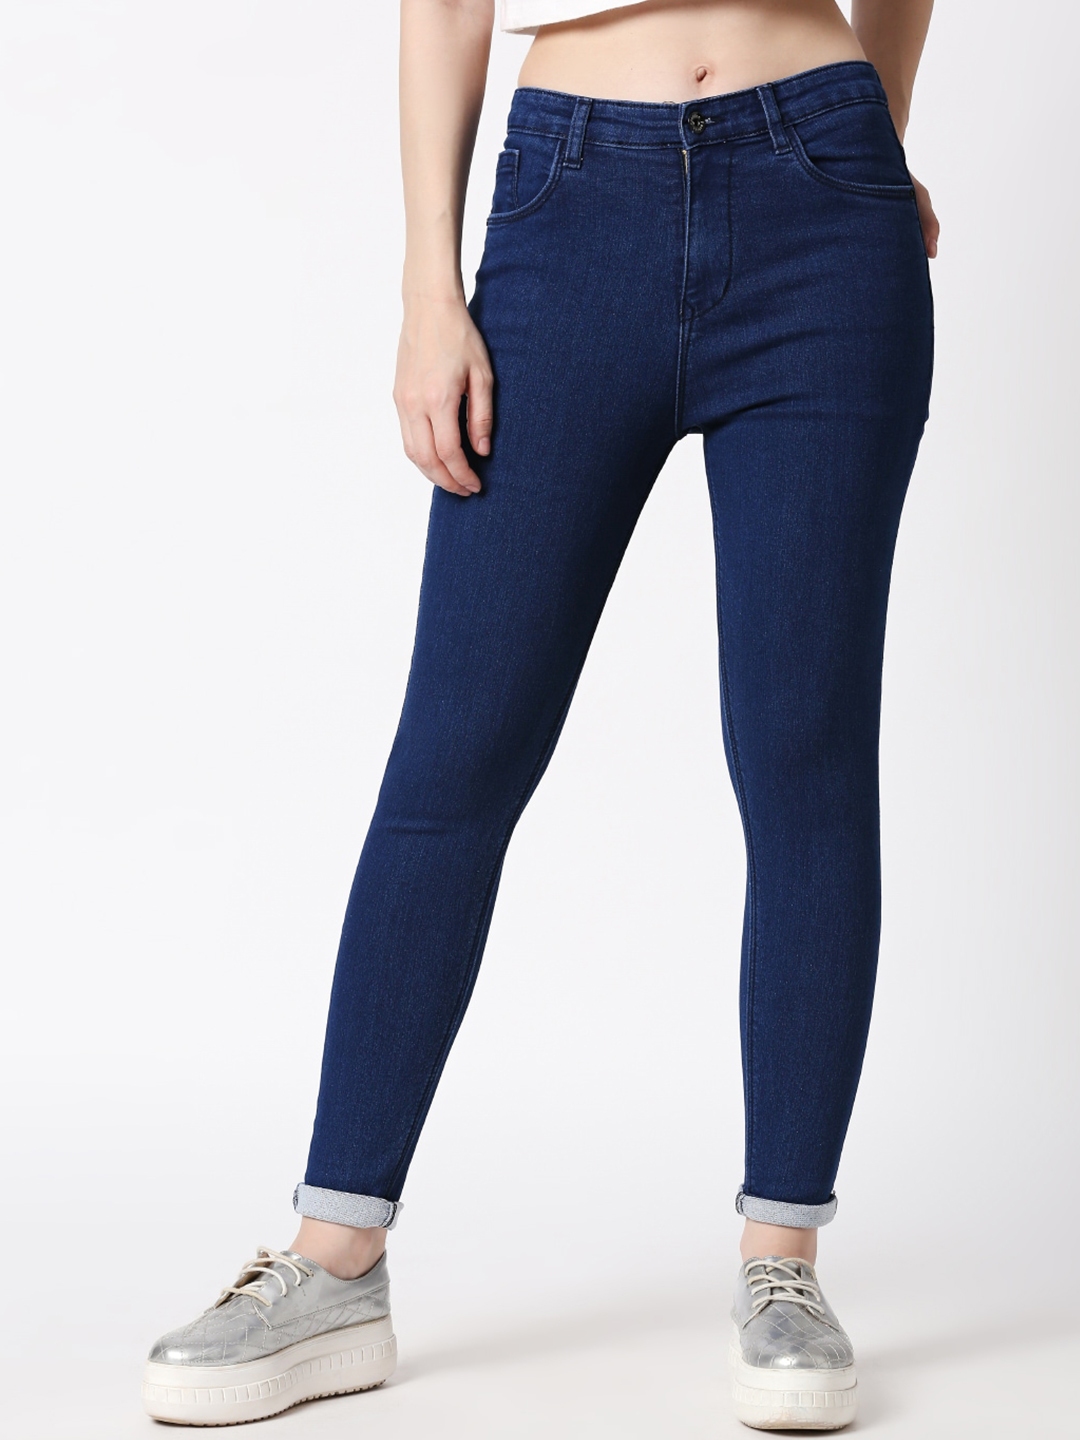 Buy High Star Women Blue Slim Fit Stretchable Jeans - Jeans for Women  13265556